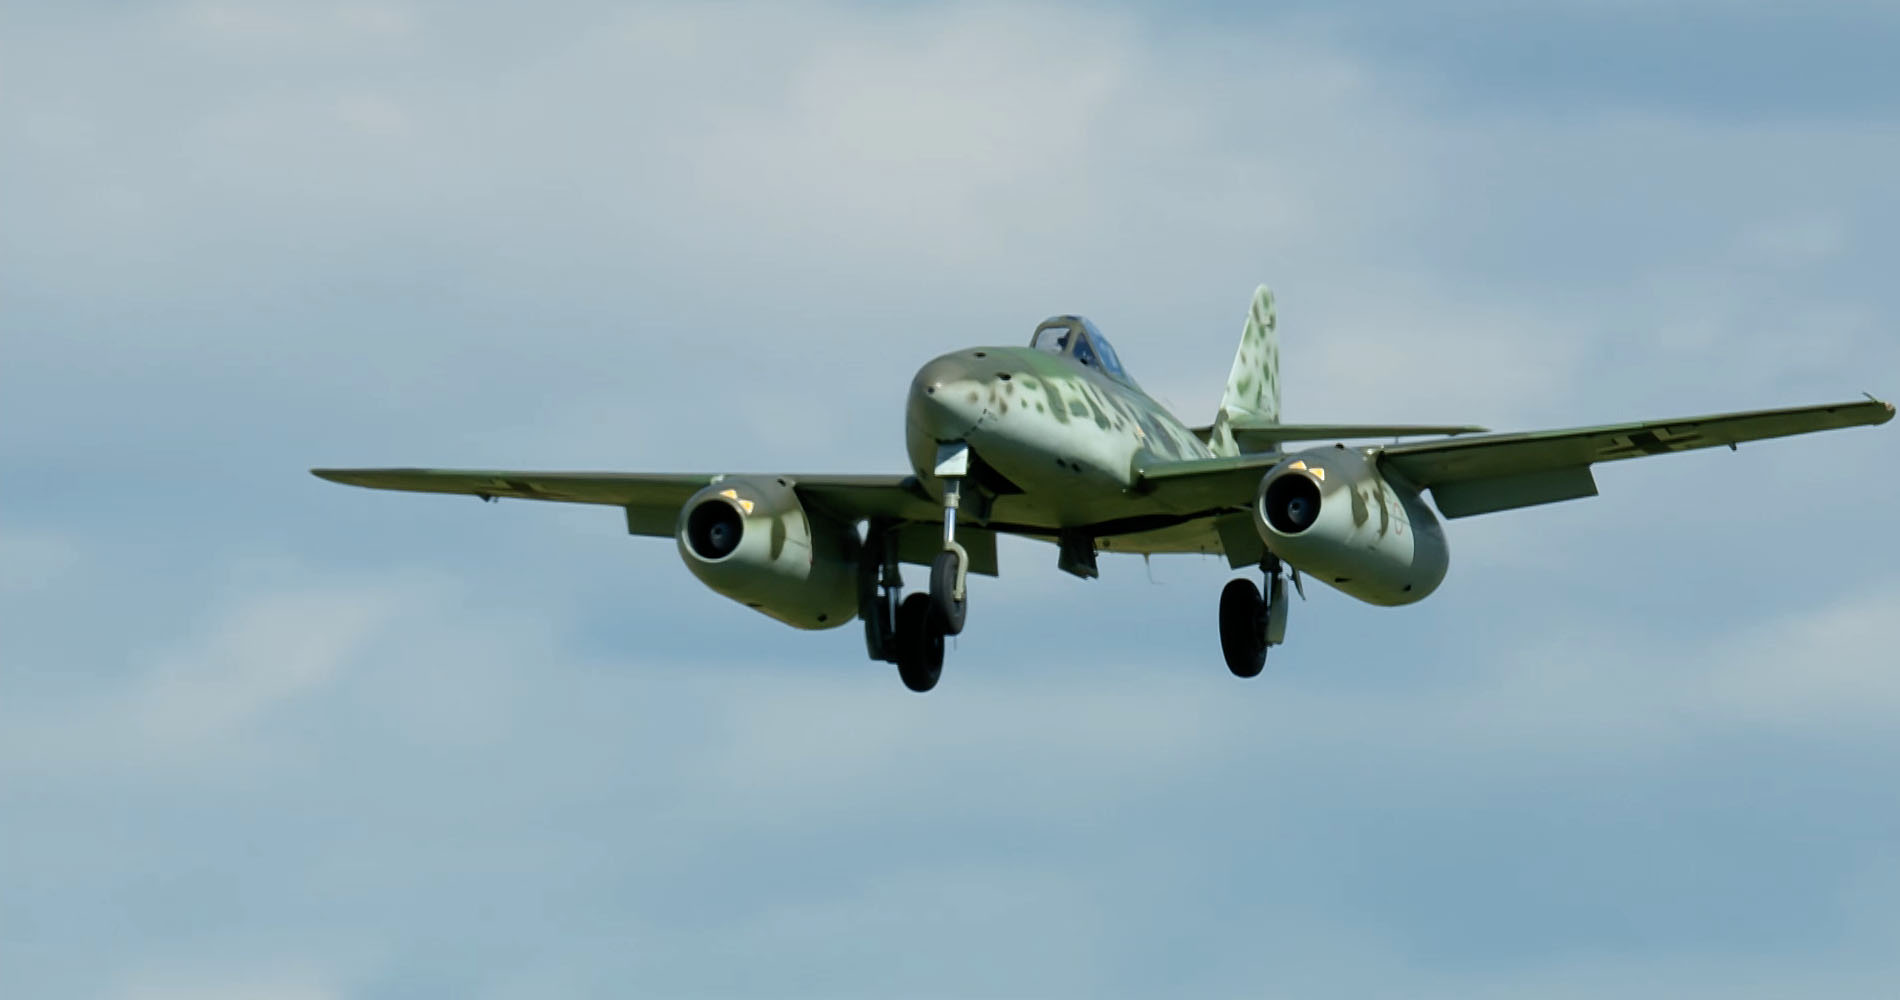  AIRPOWER22 - Me 262 